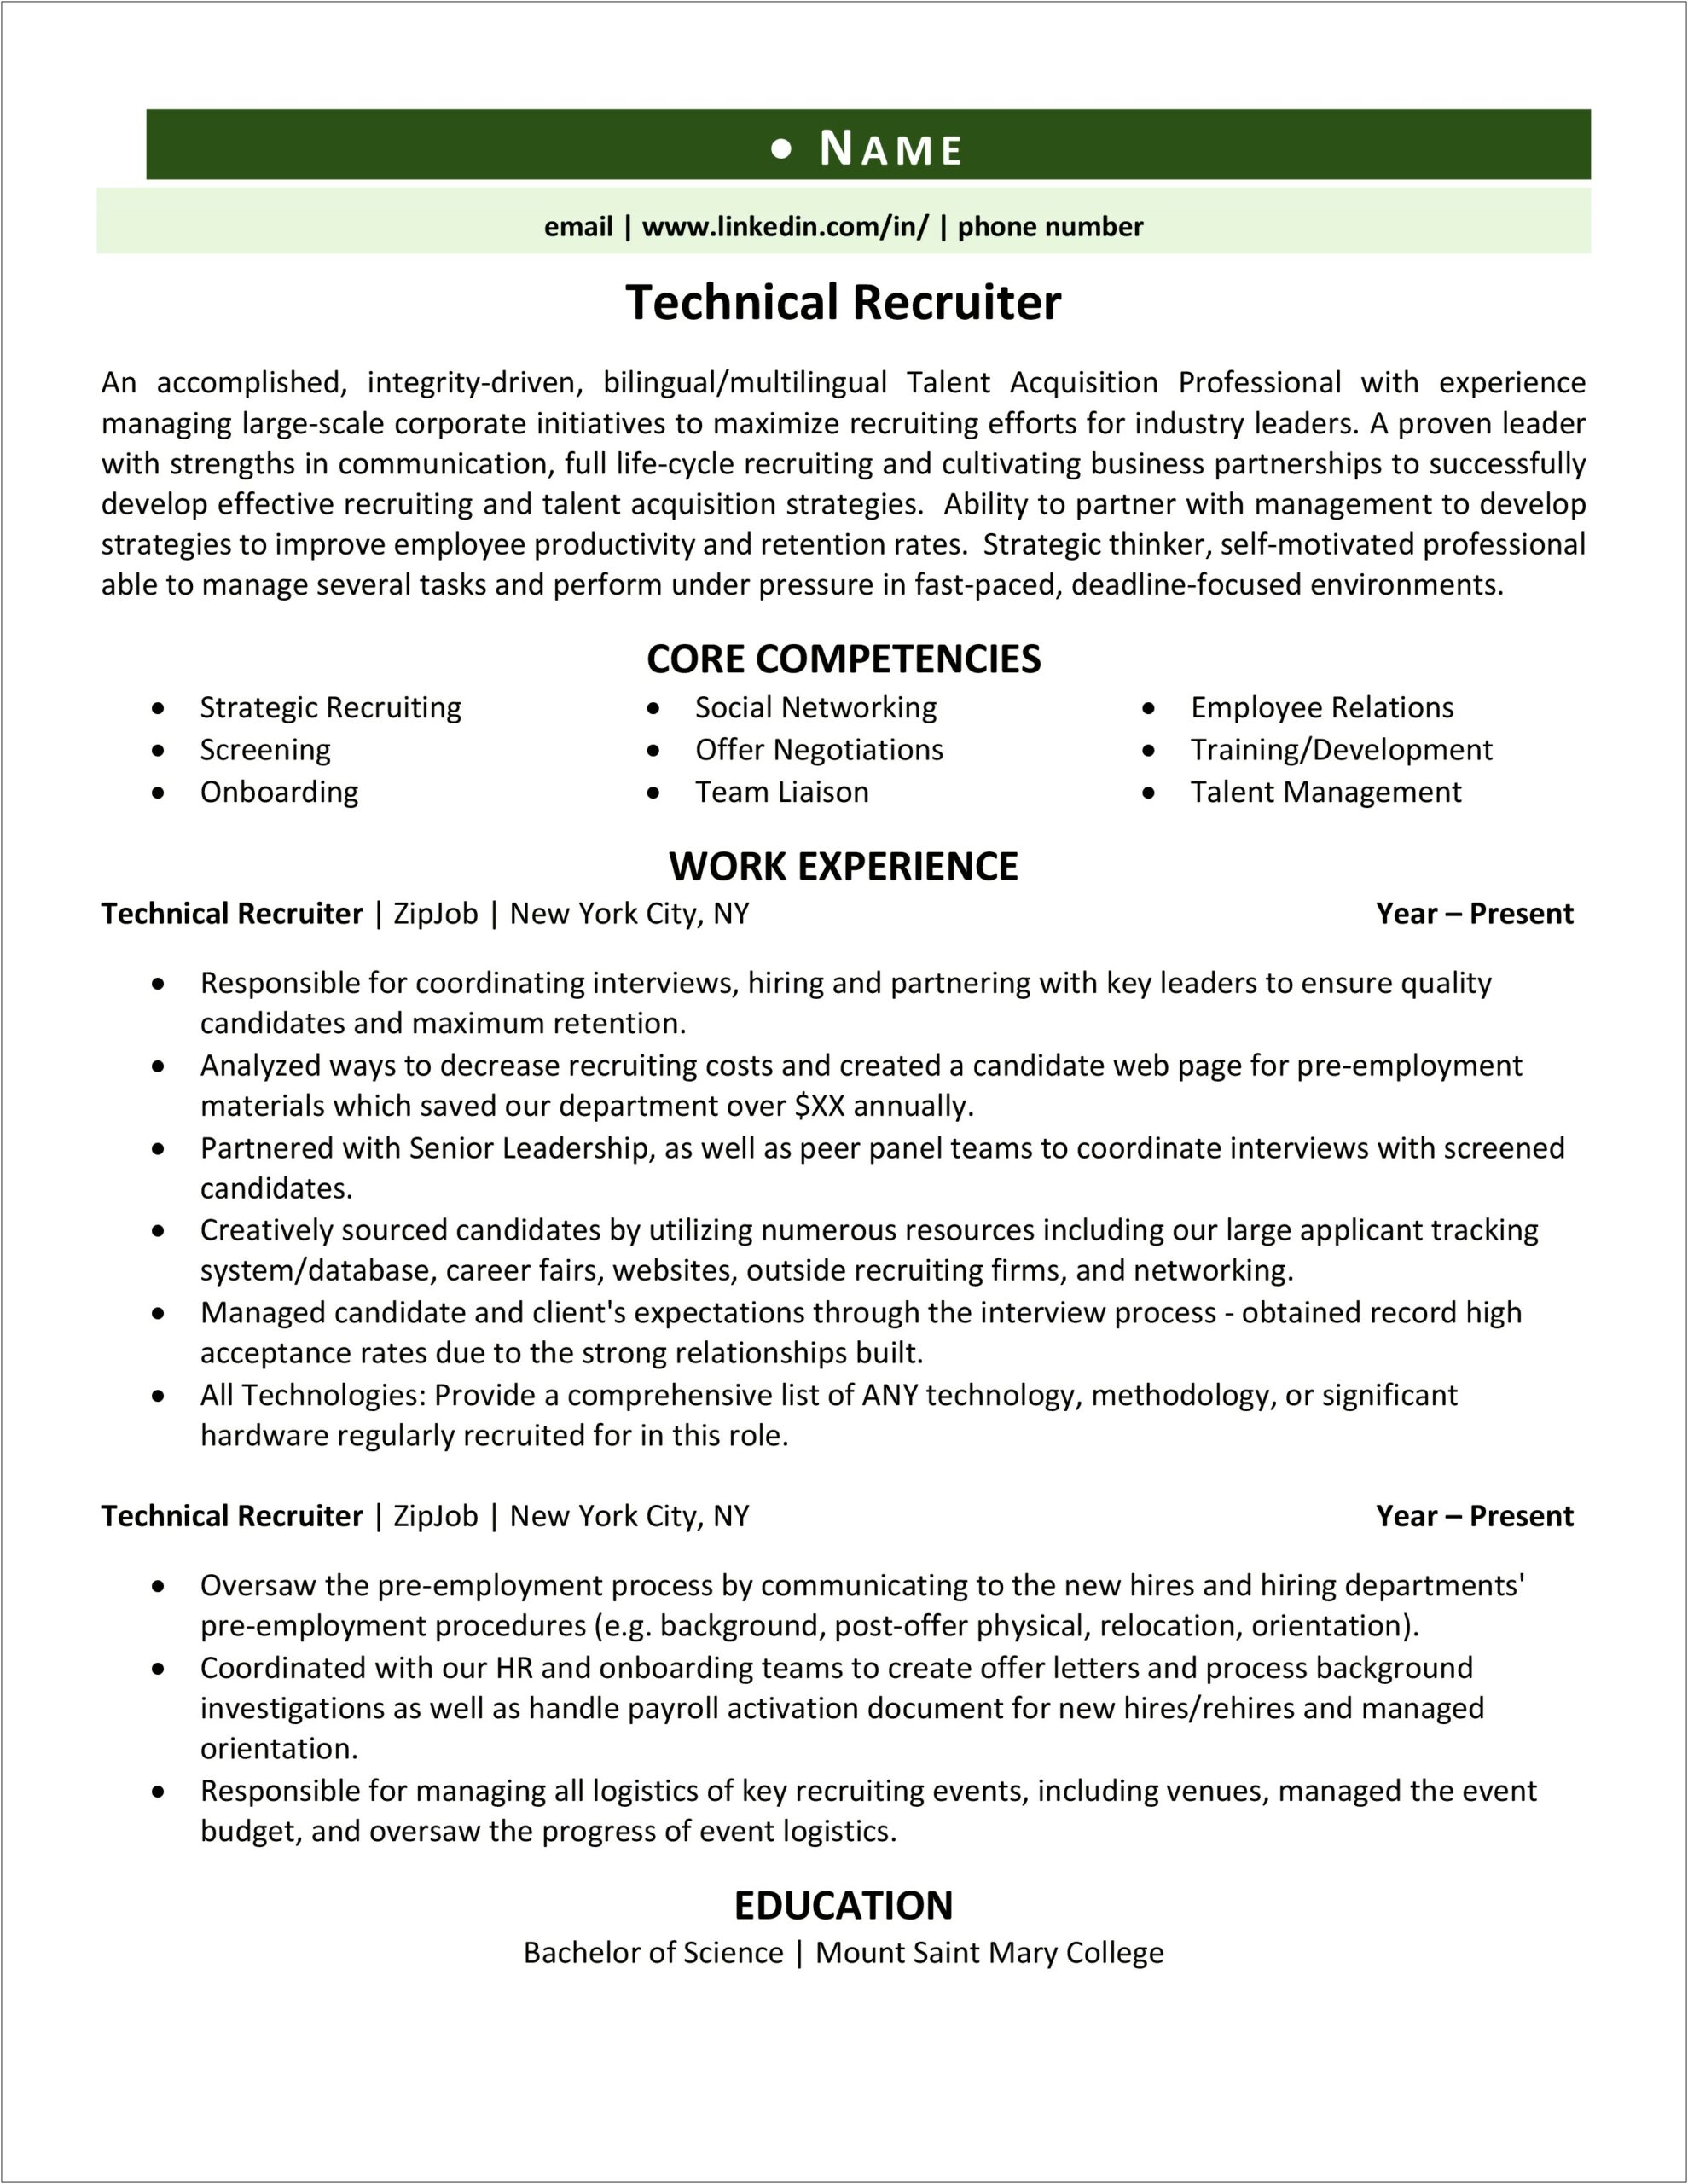 Email To Recruiter With Resume Example